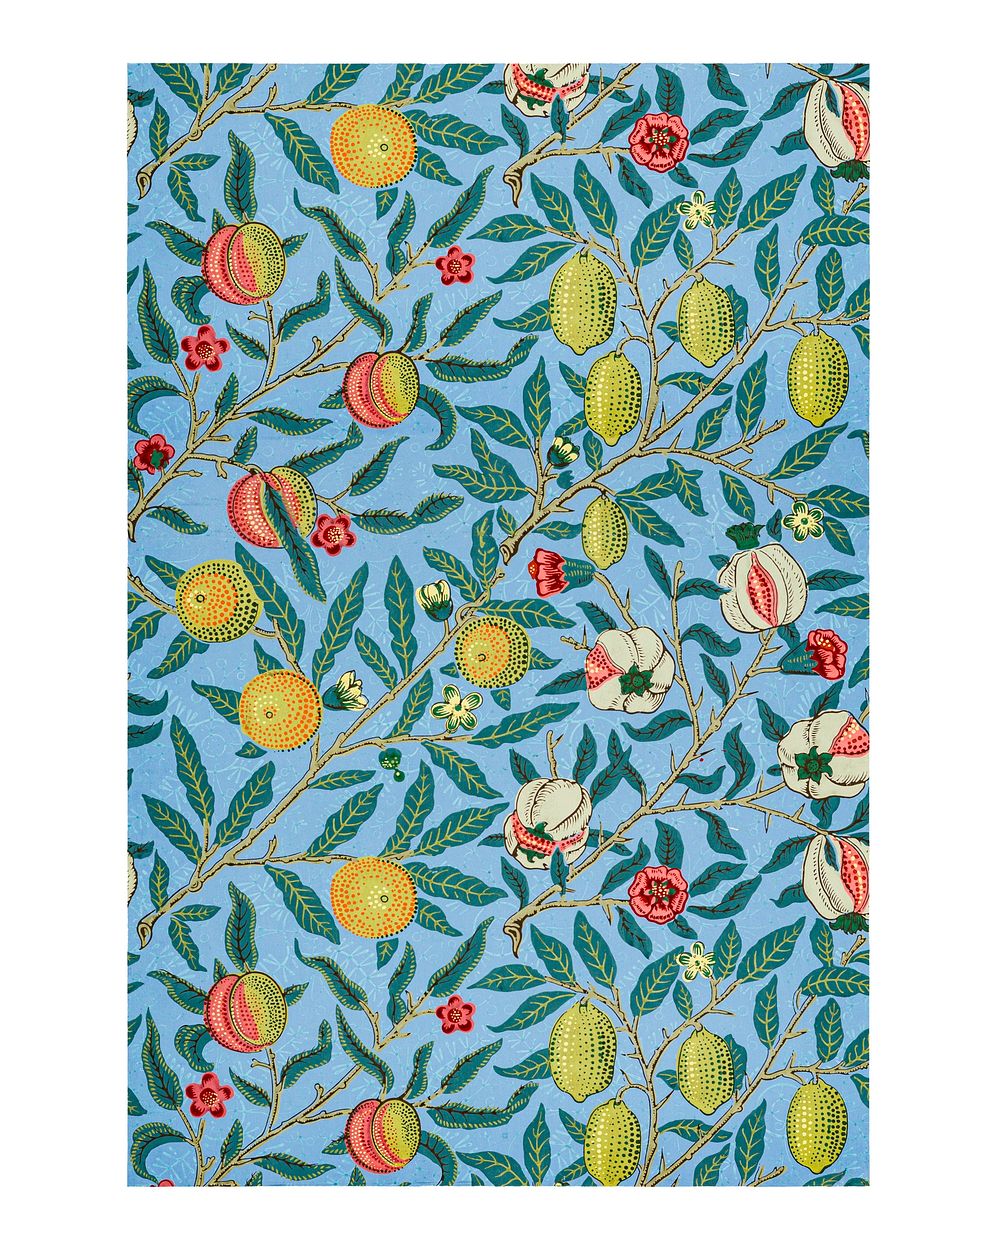 William Morris poster, vintage Four fruits pattern wall decor (1862). Original from The Smithsonian Institution. Digitally…